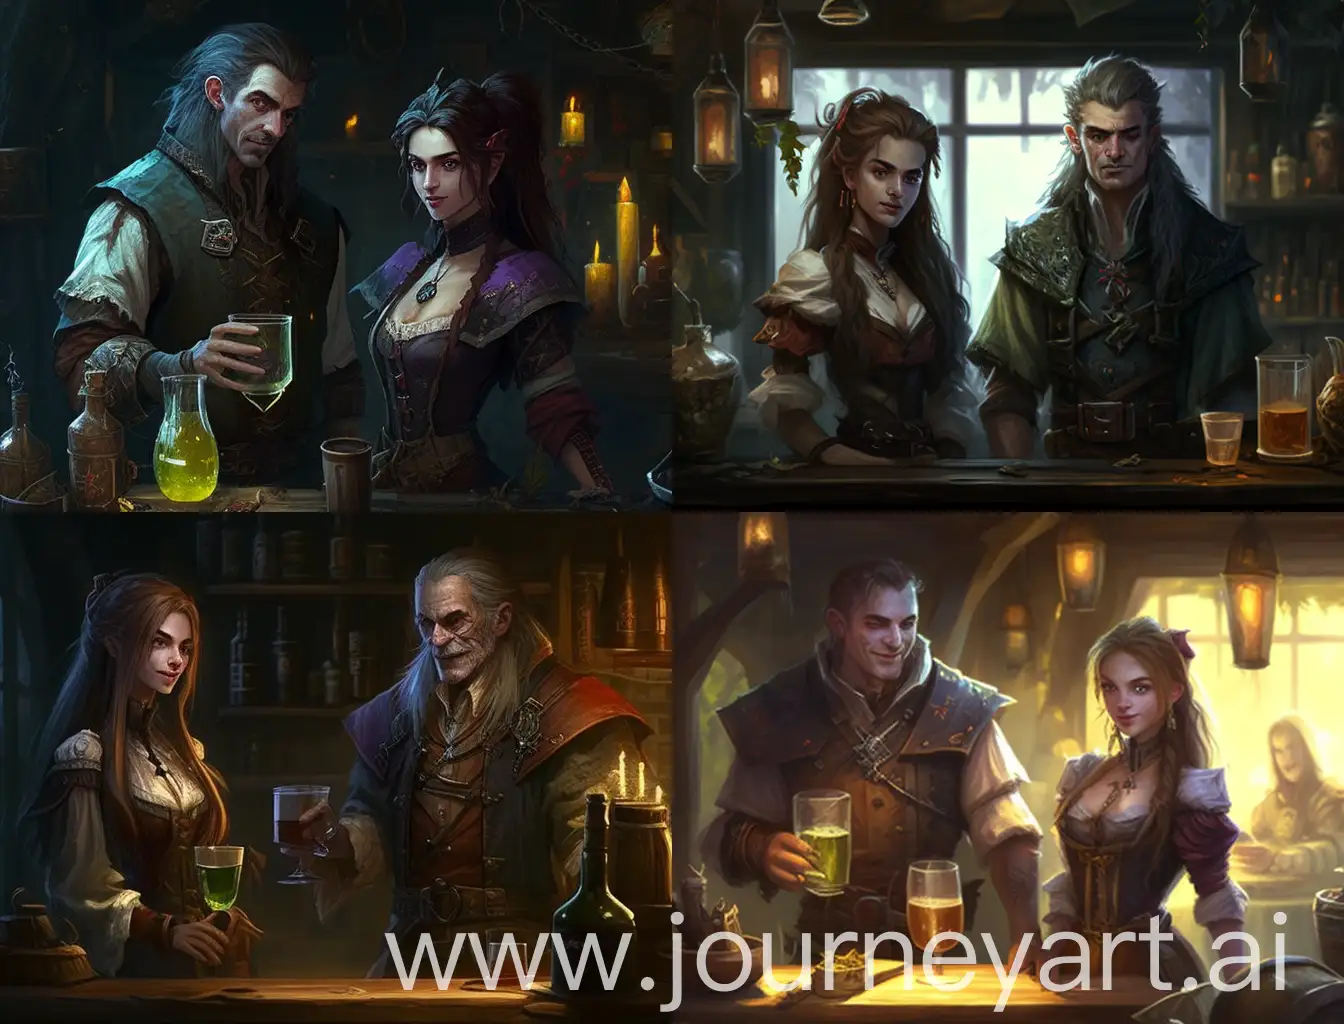 A medieval tavern with a friendly male half-demonic bartender and a pretty elven female proprietress